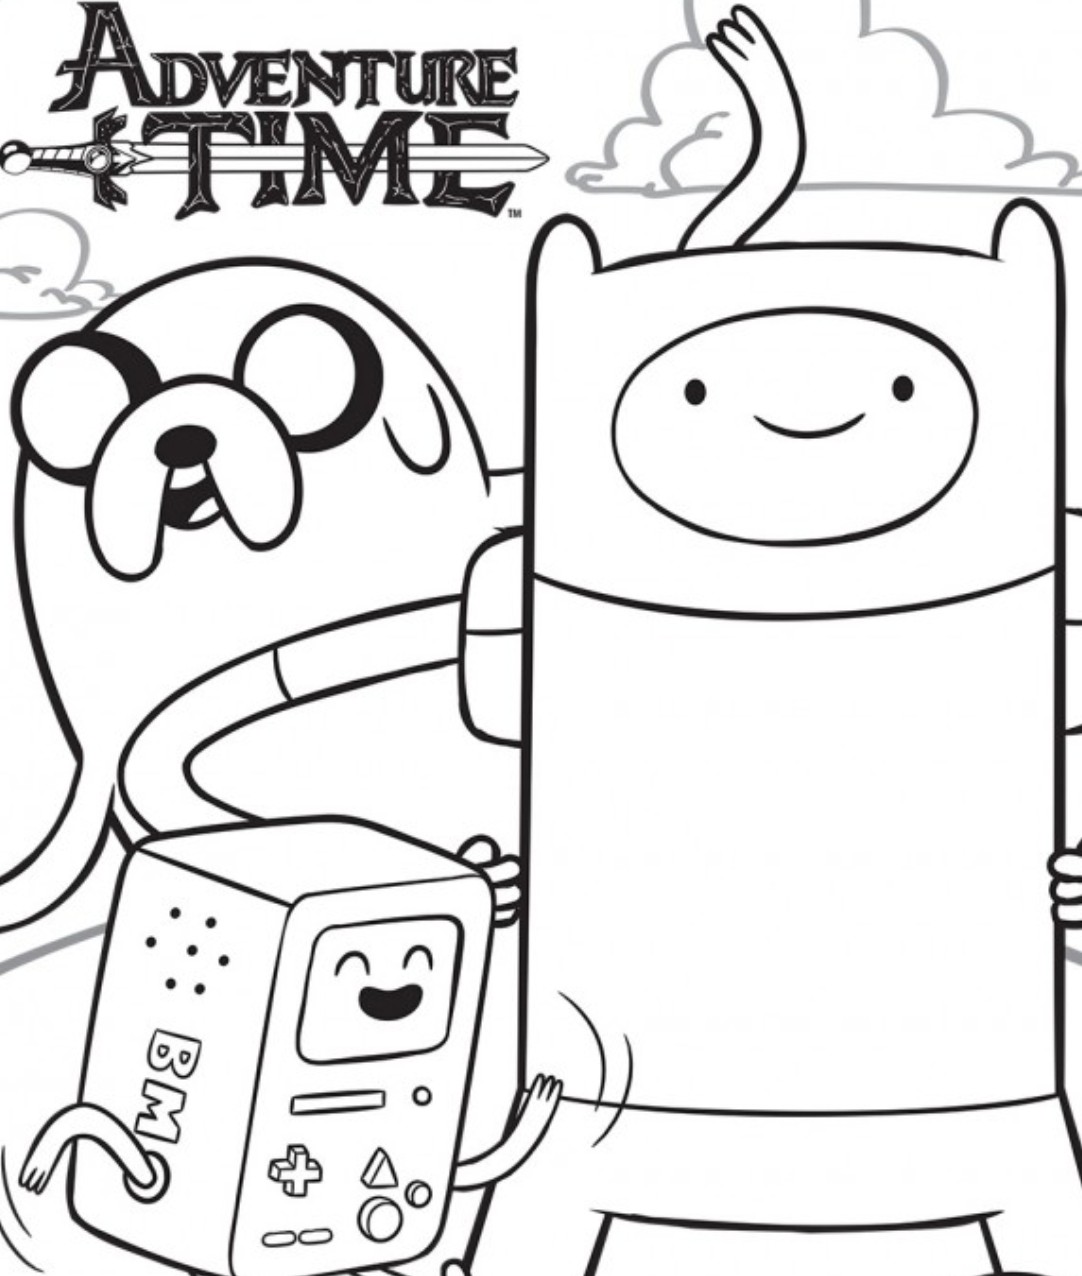 Adventure Time Printable Coloring Pages Printable Blank World